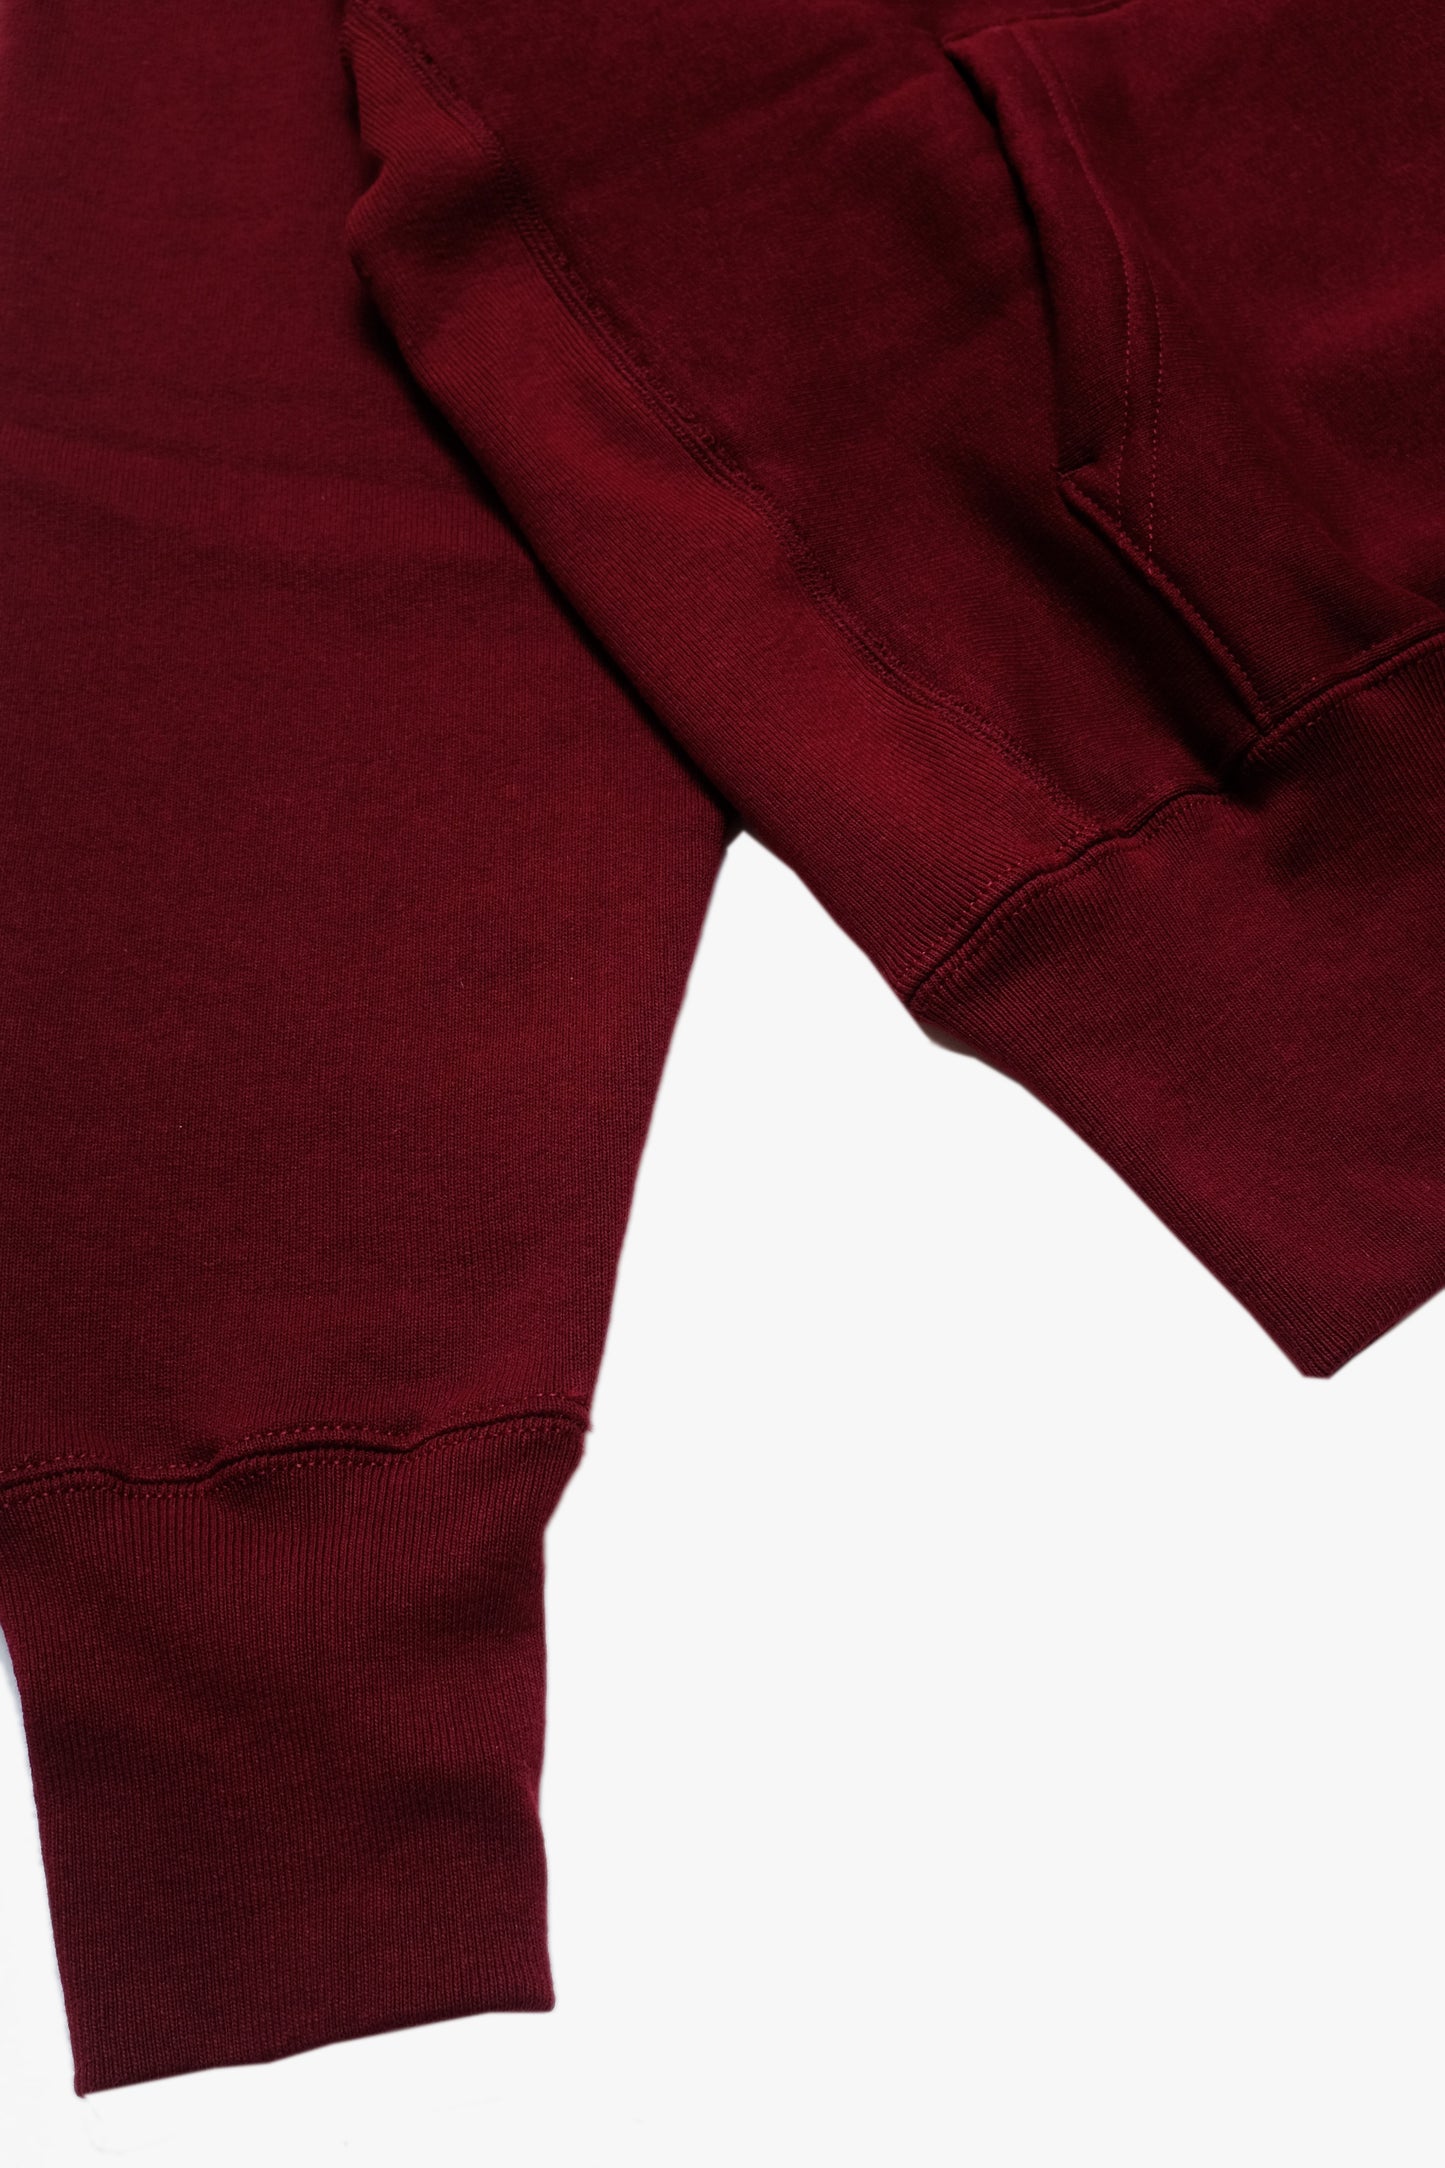 Hoodie Max-weight - Bordeaux